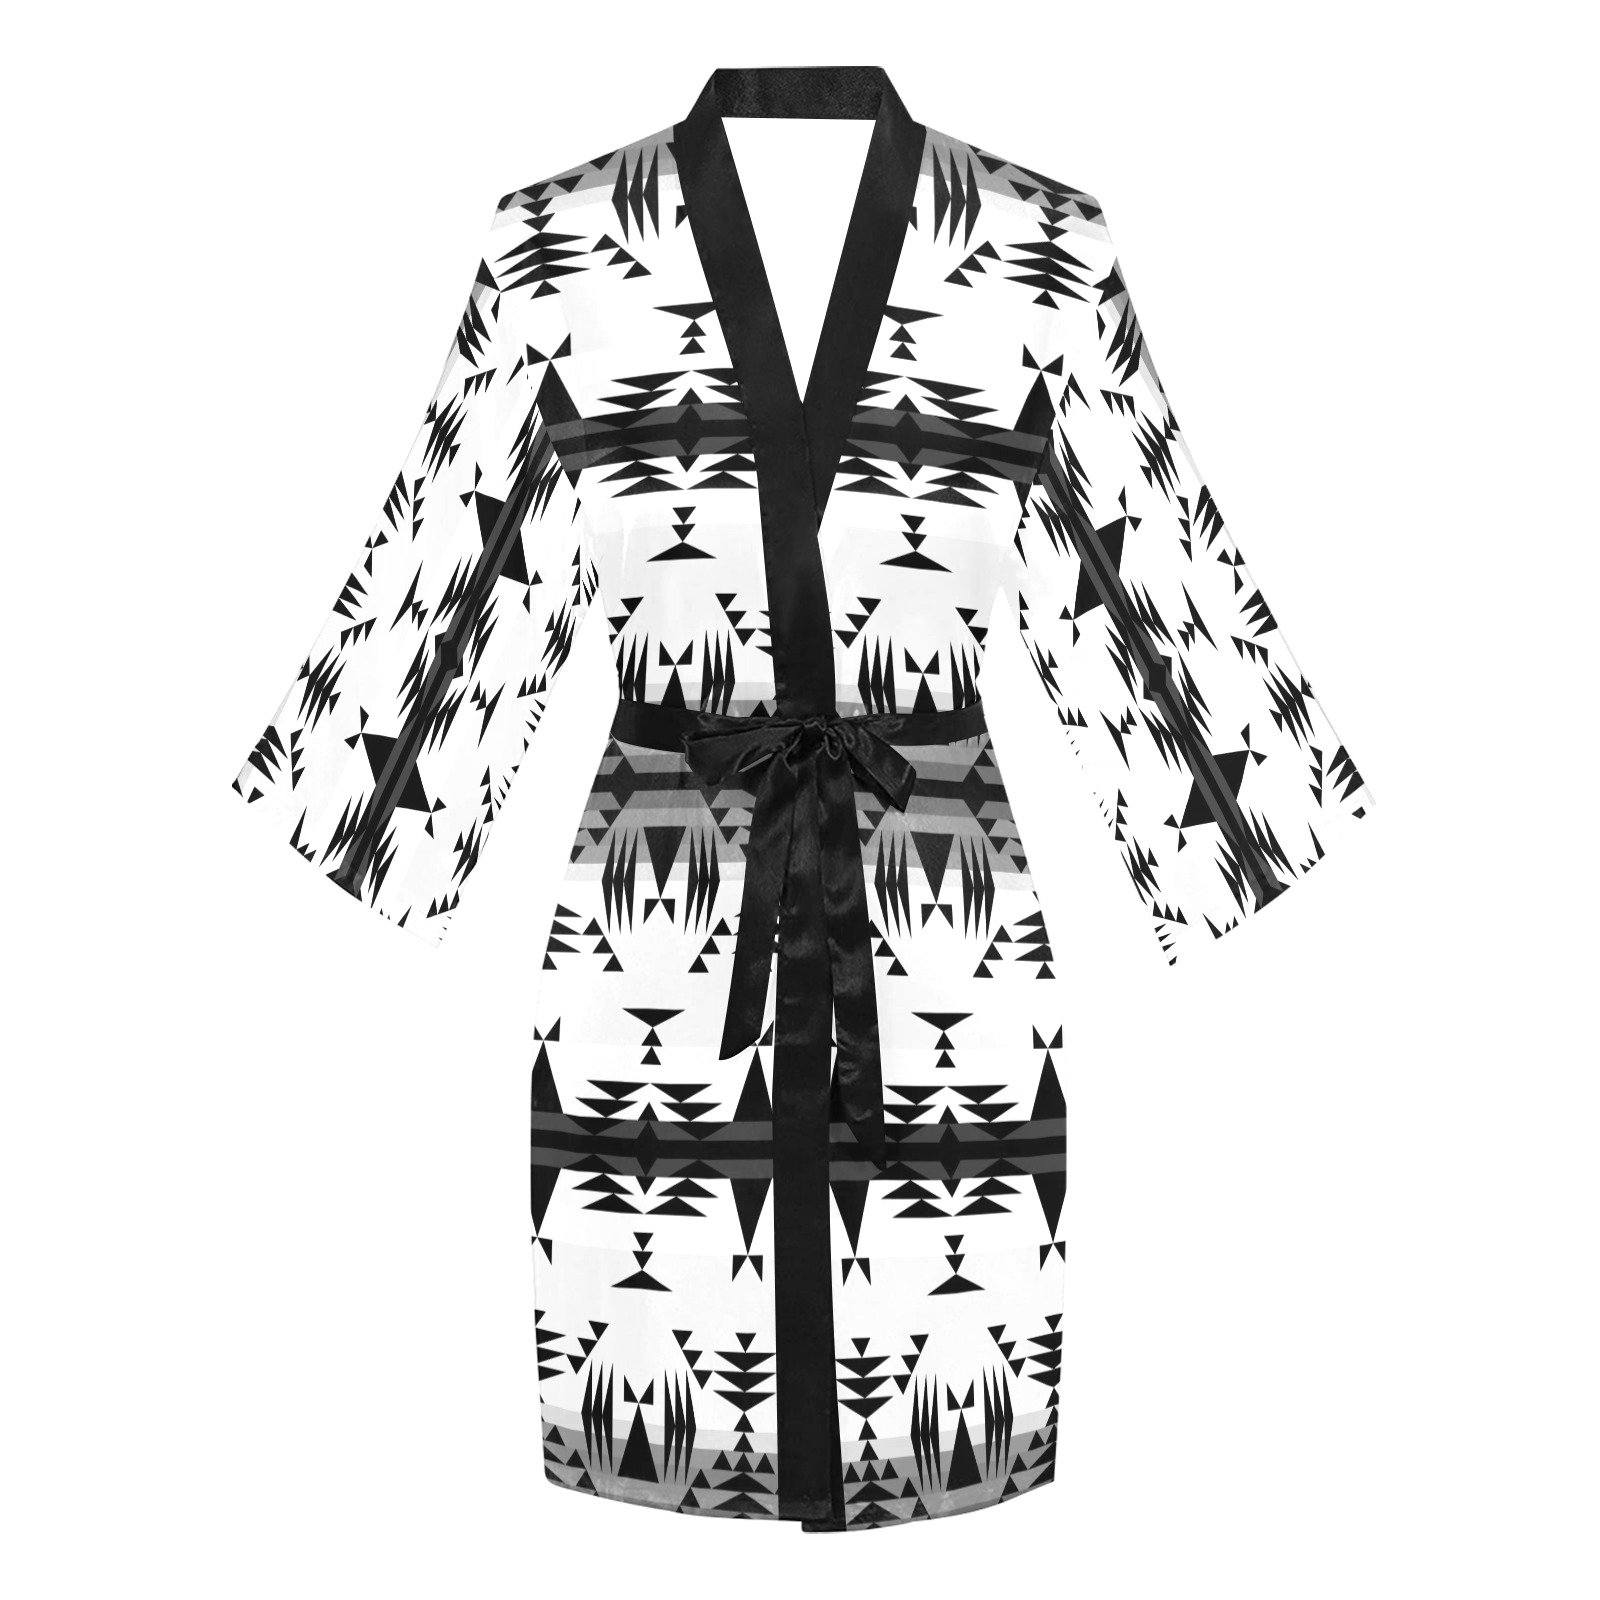 Between the Mountains White and Black Long Sleeve Kimono Robe Long Sleeve Kimono Robe e-joyer 